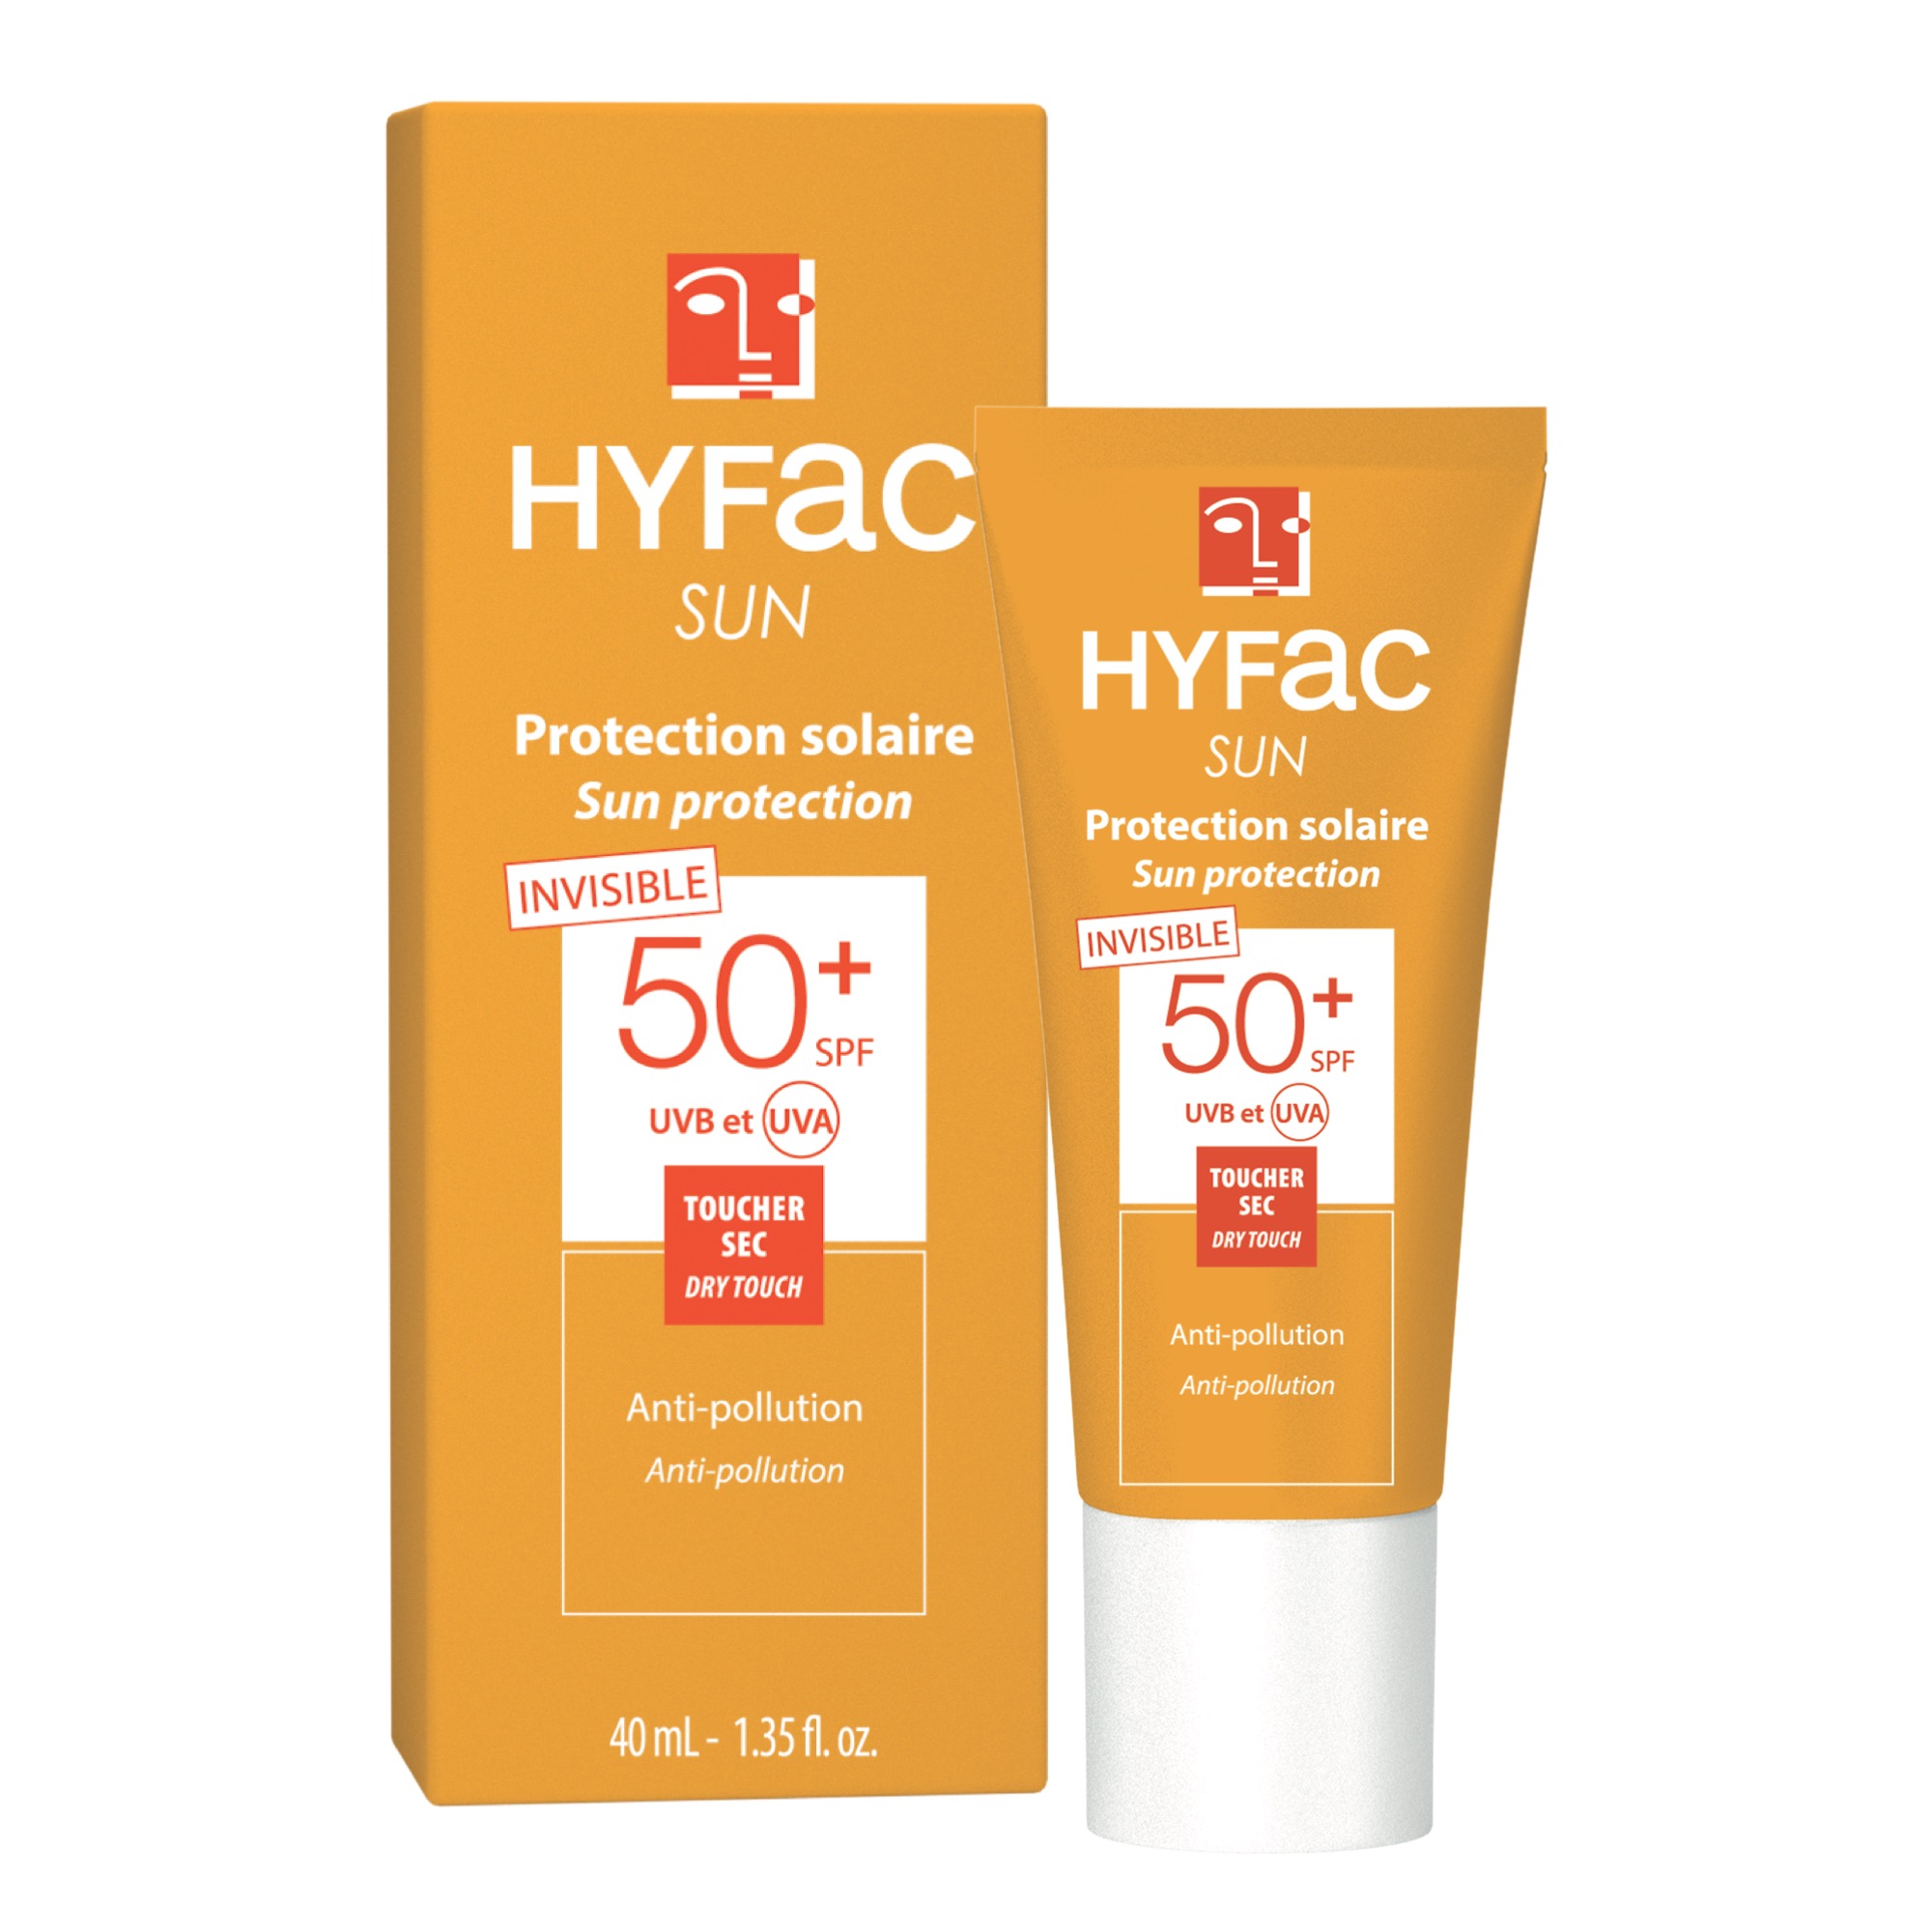 HYFAC SUN Protection solaire invisible